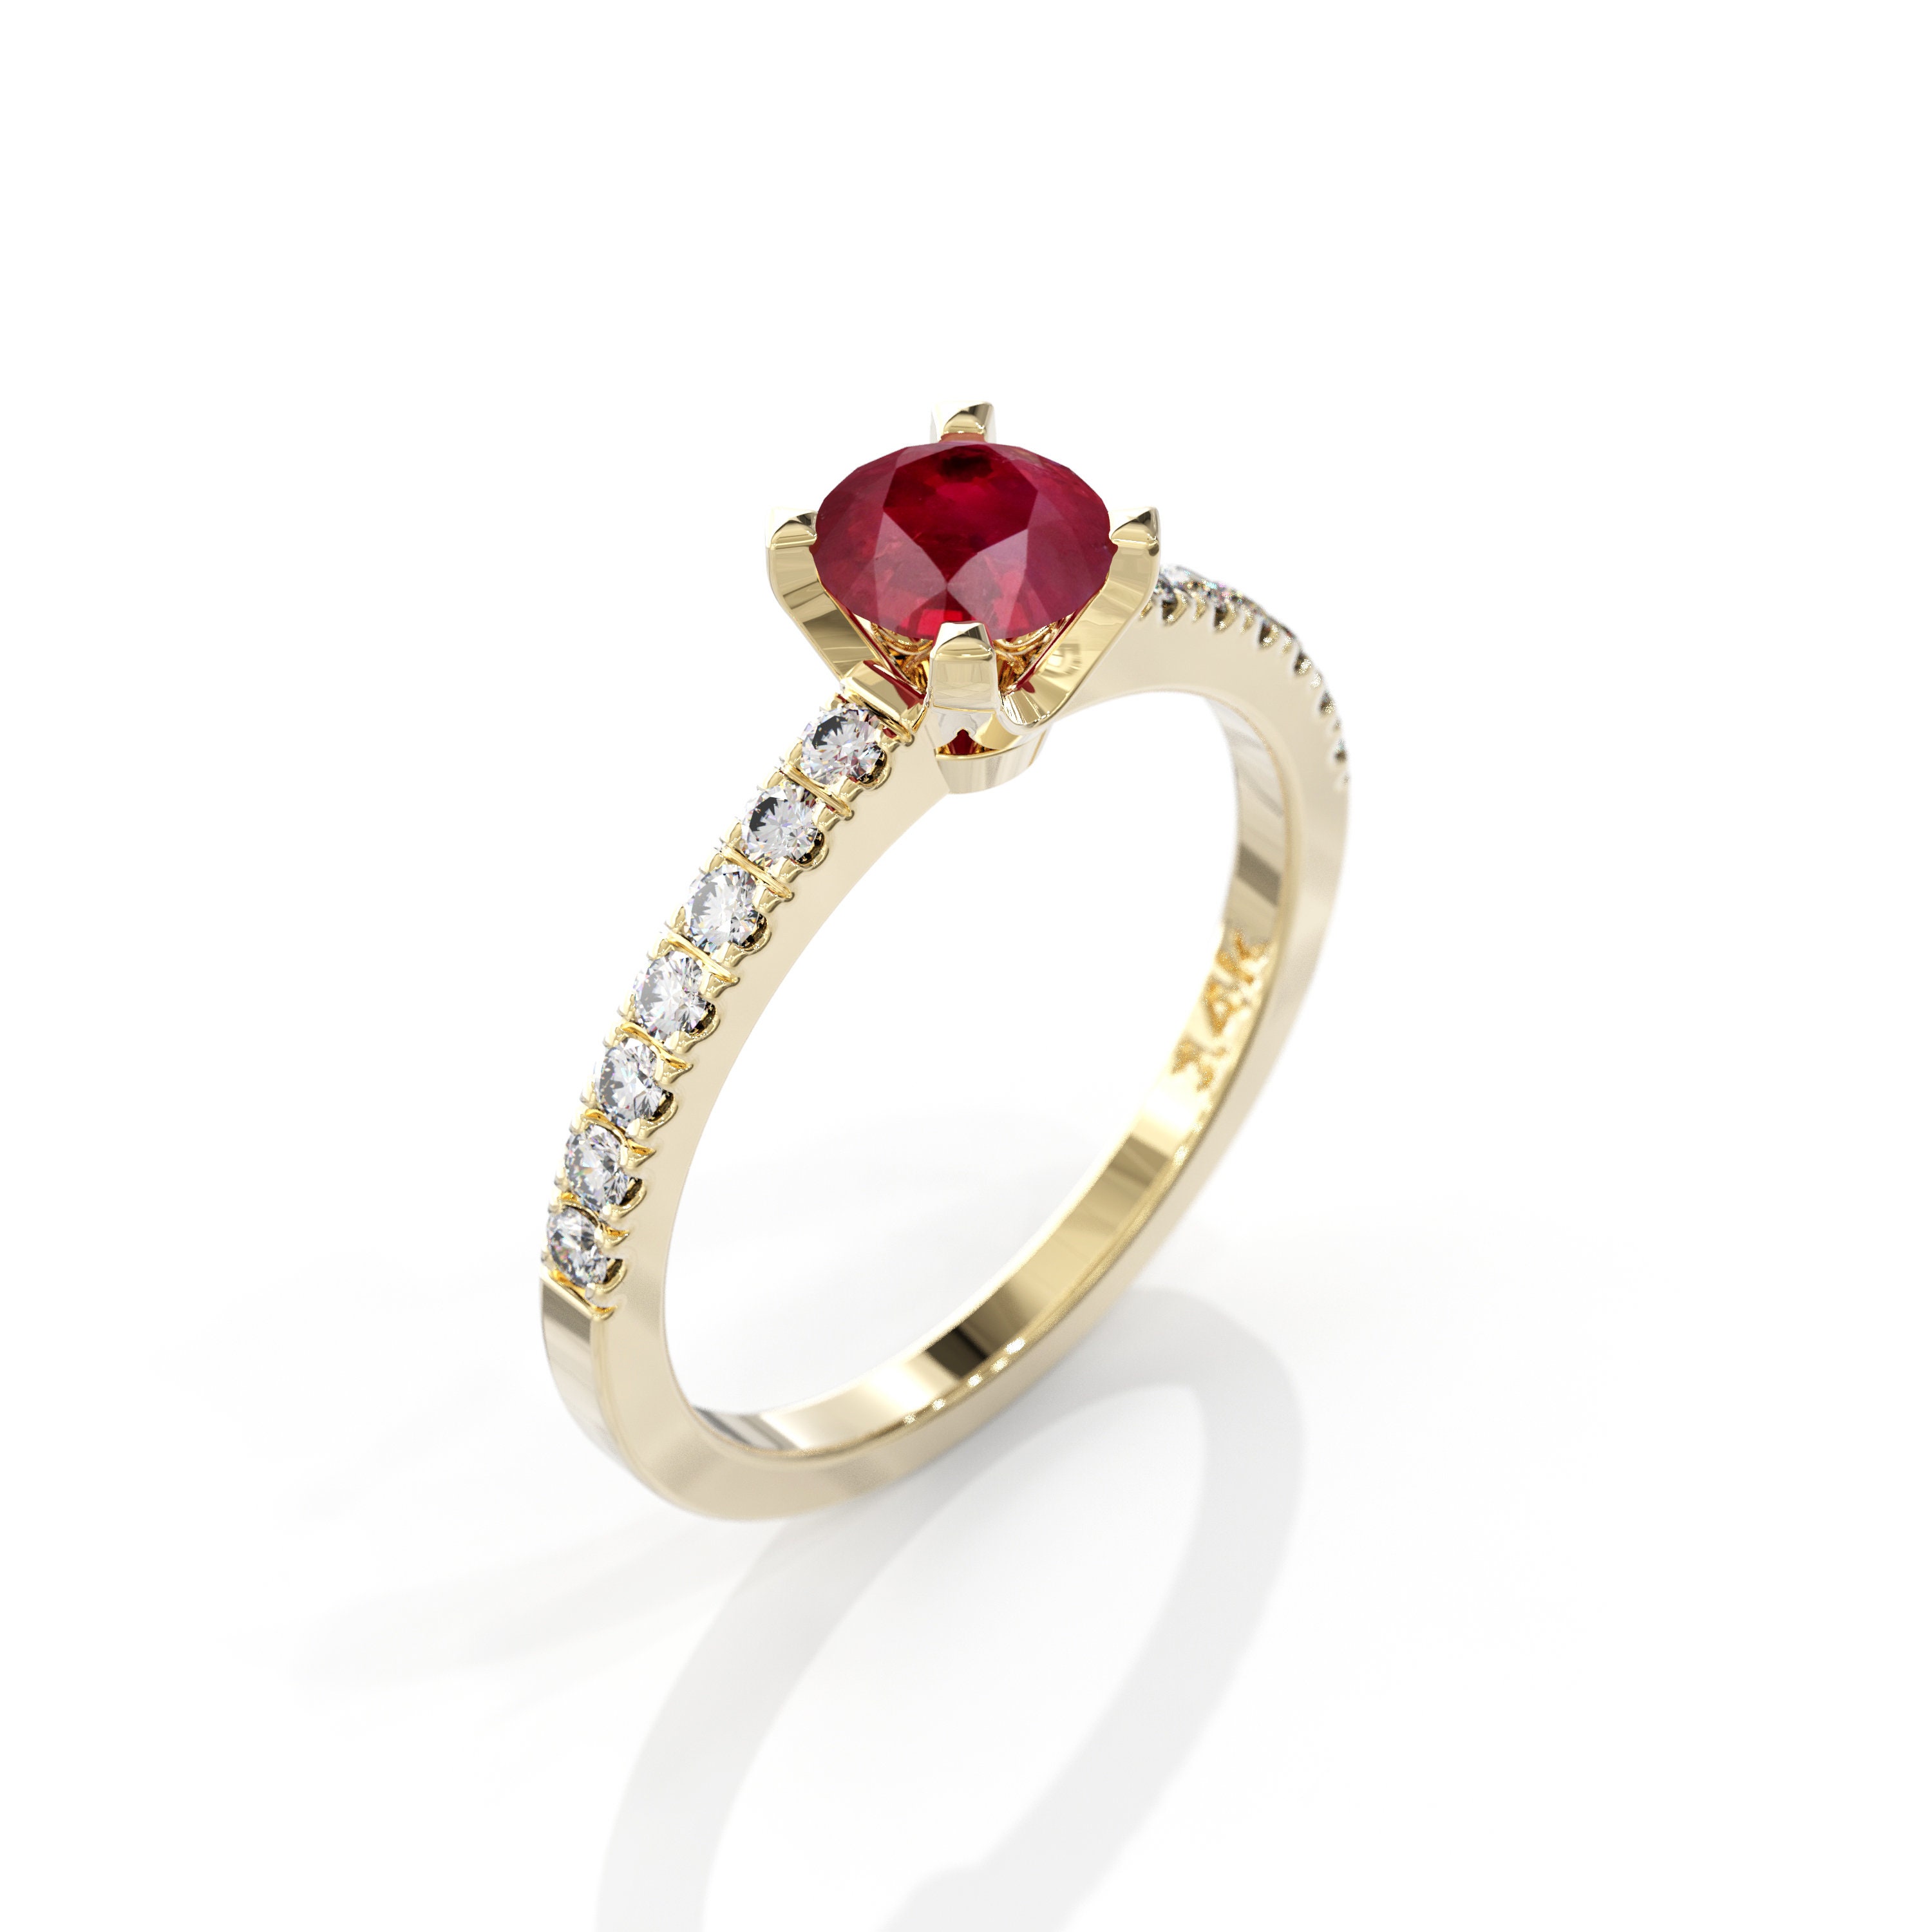 Ruby Ring With Diamonds 14K White Gold Round Cut 0.5 Carat - Etsy